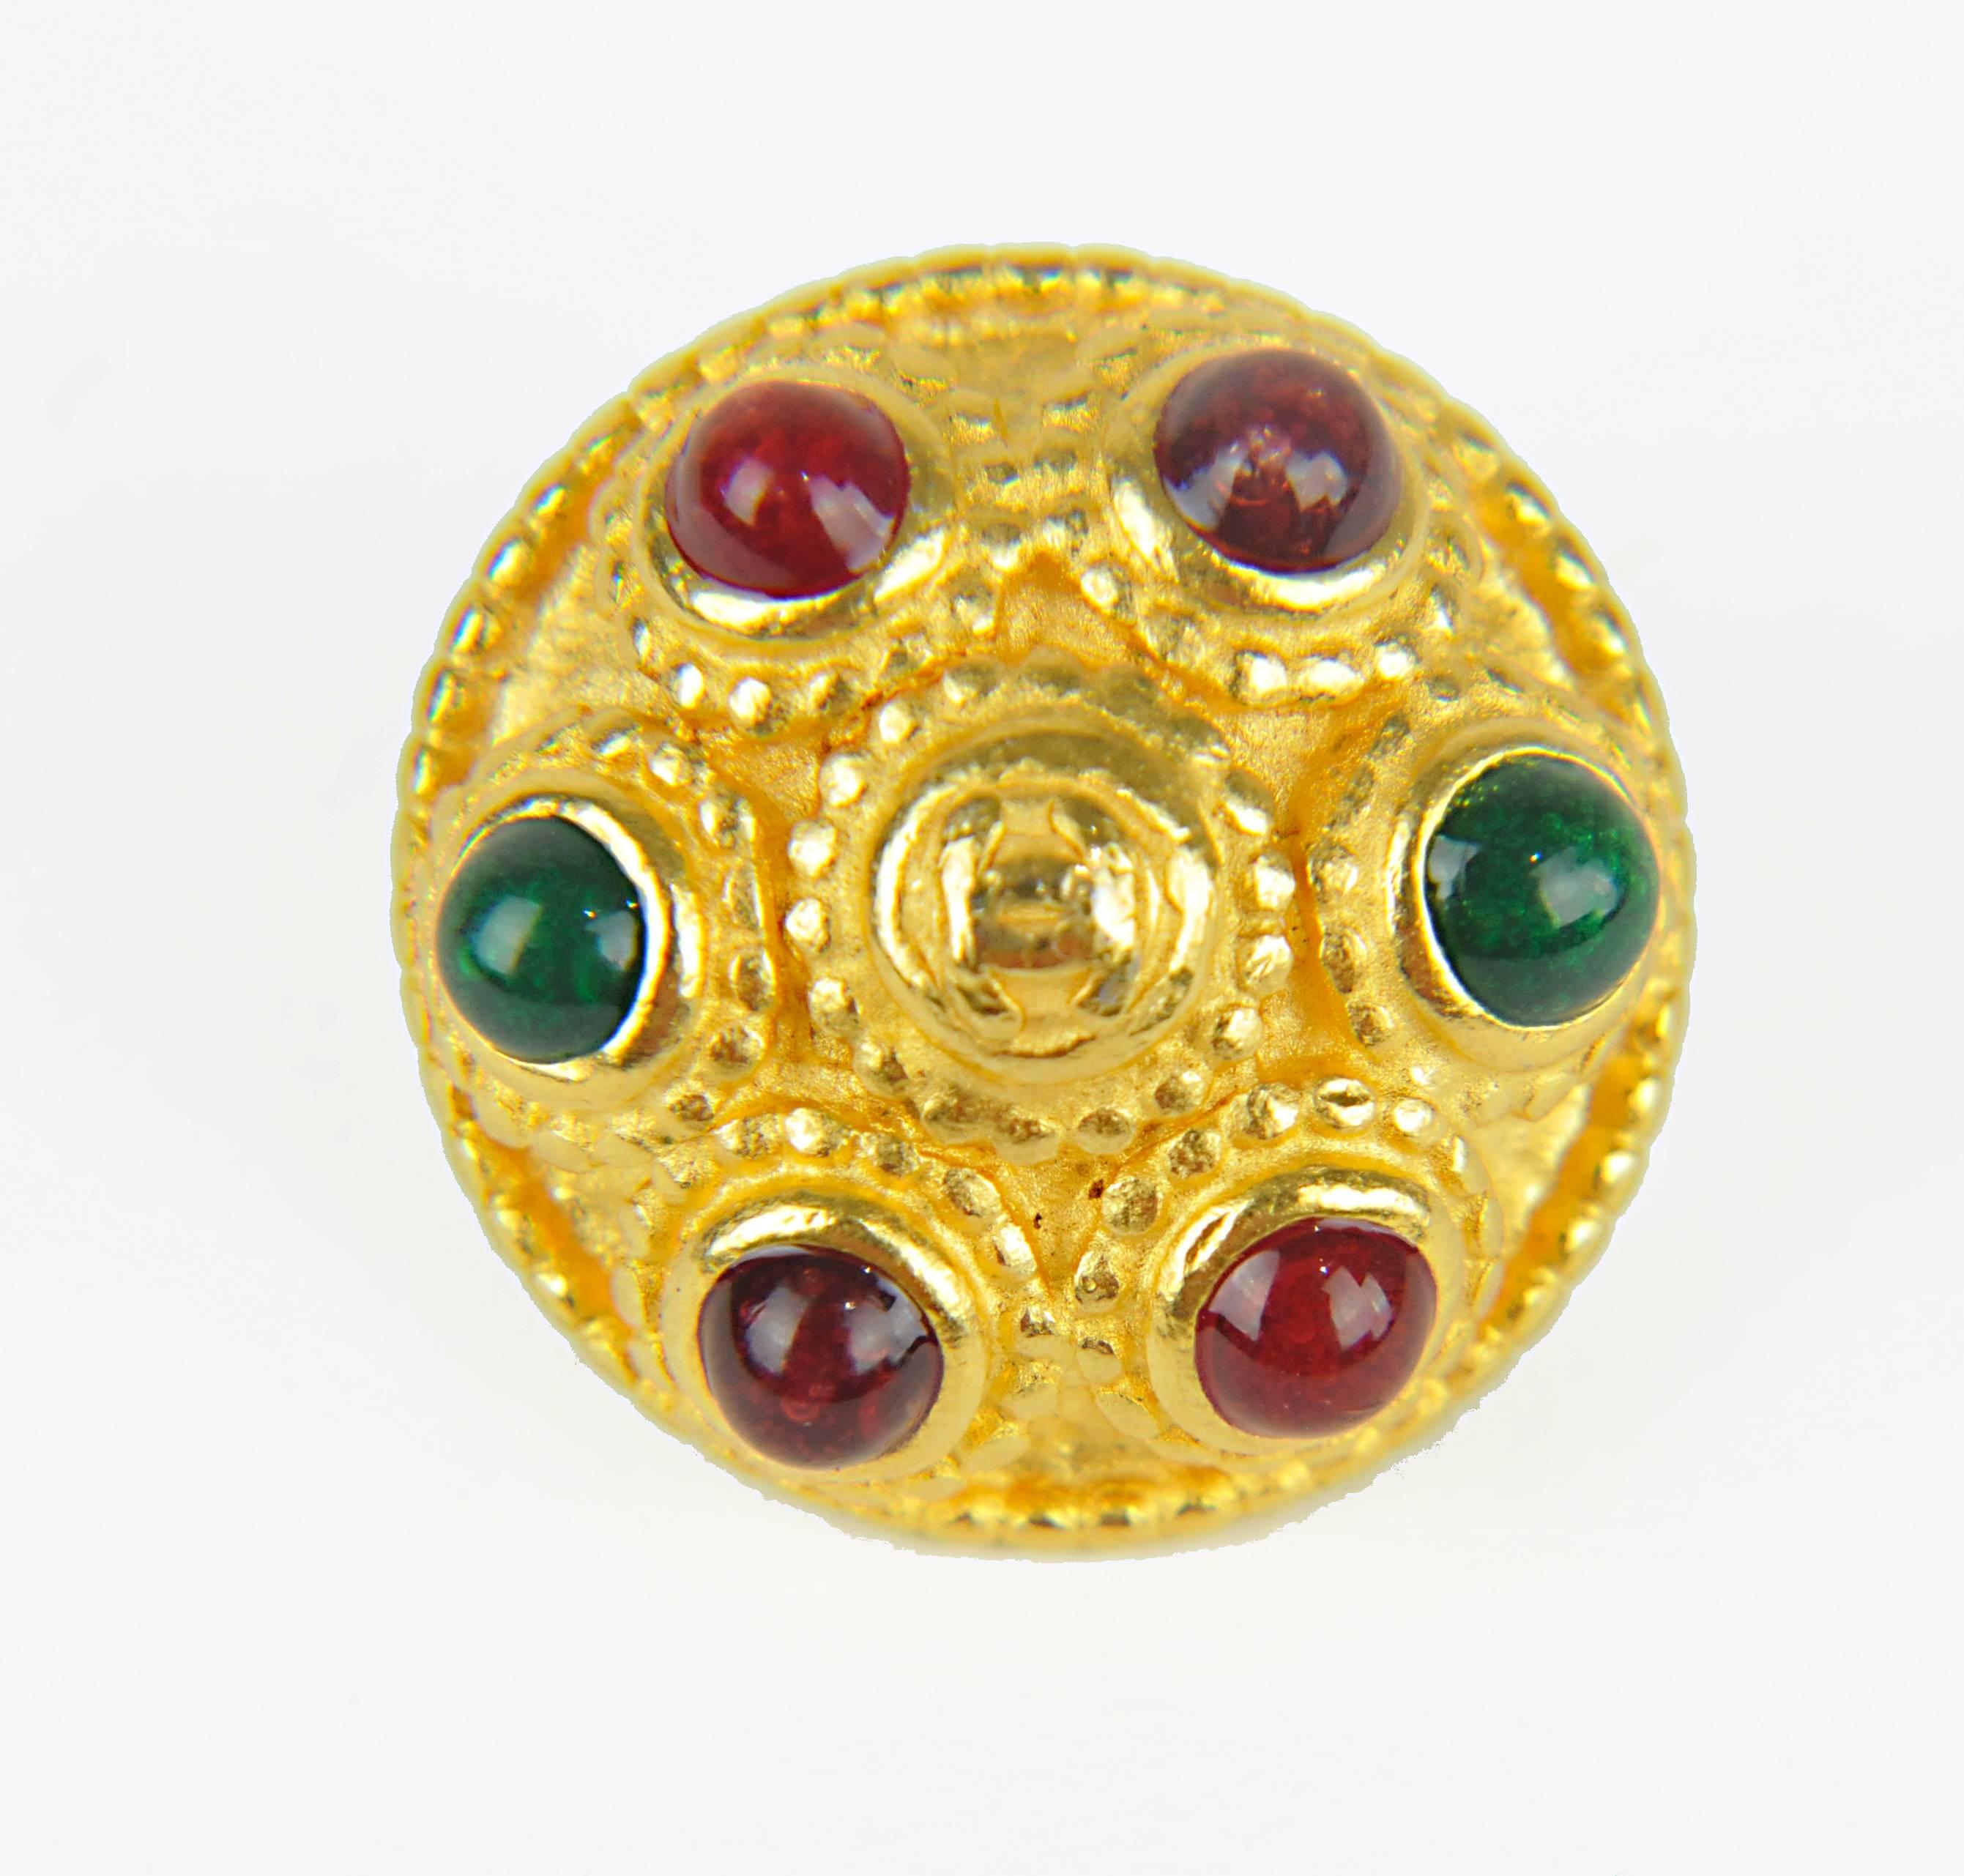 These buttons were designed by Madame Gripoix for the famous Chanel Military Collection of fall 1996. There are 6 buttons 3/4" in diameter and 2 buttons 5/8" in diameter.  Perfect for a suit jacket and cuffs. The design is gilt metal with